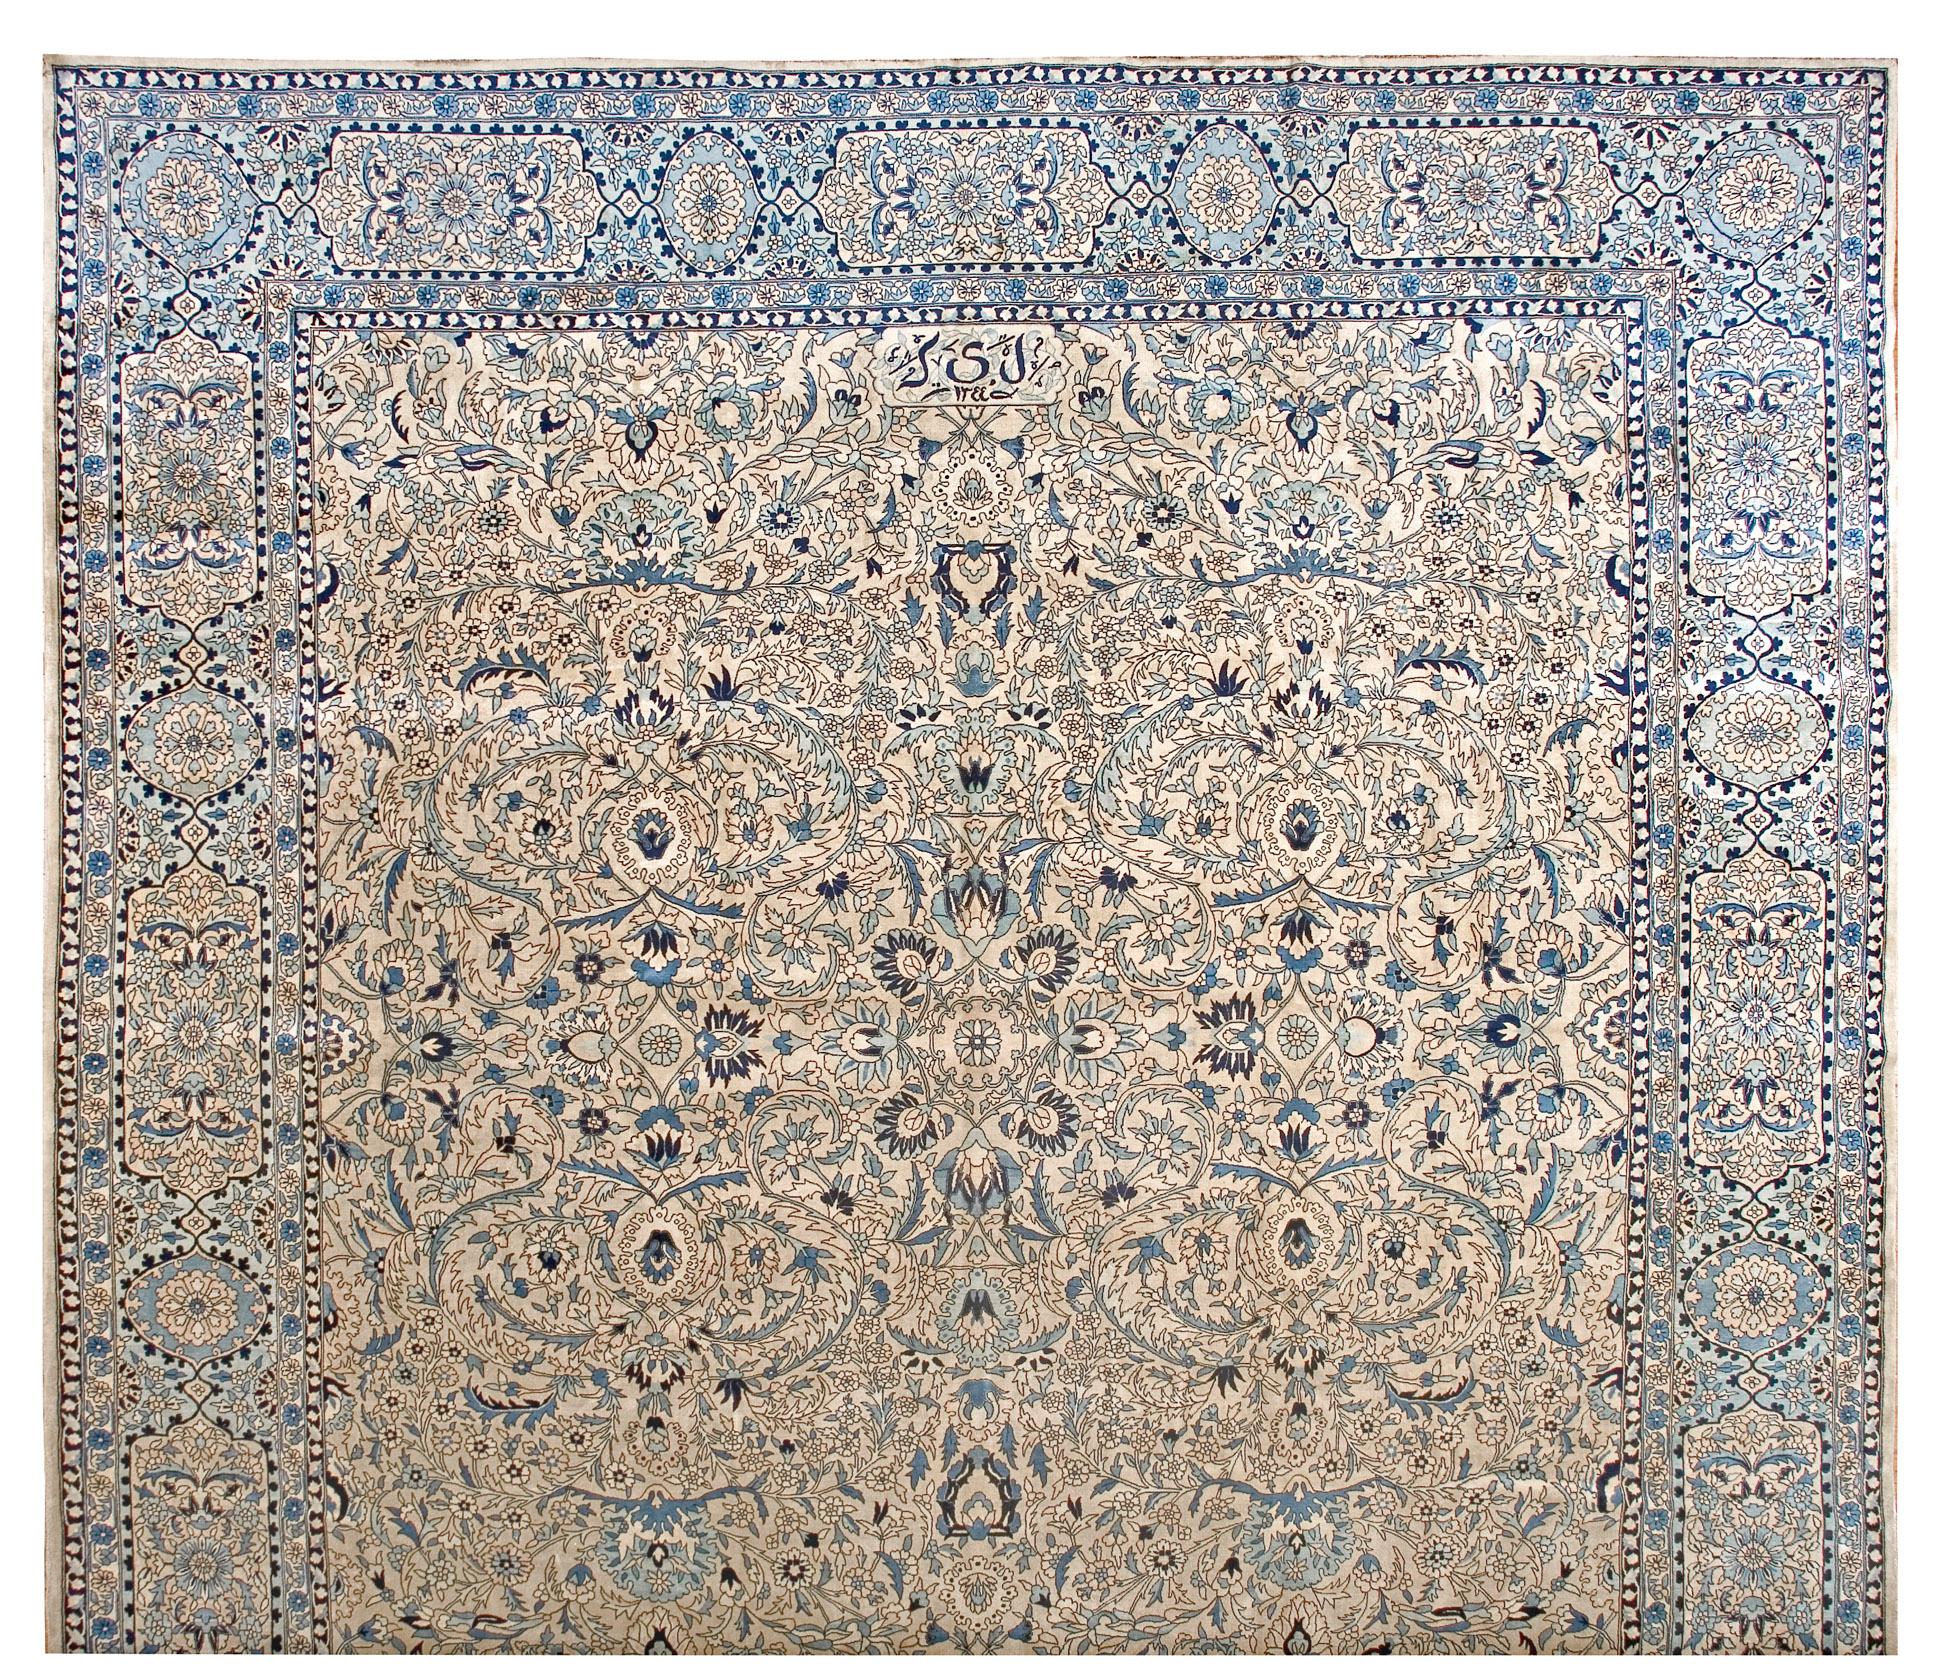 Agra Early 20th Century N. Indian Lahore Carpet ( 16' x 17' - 487 x 518 ) For Sale